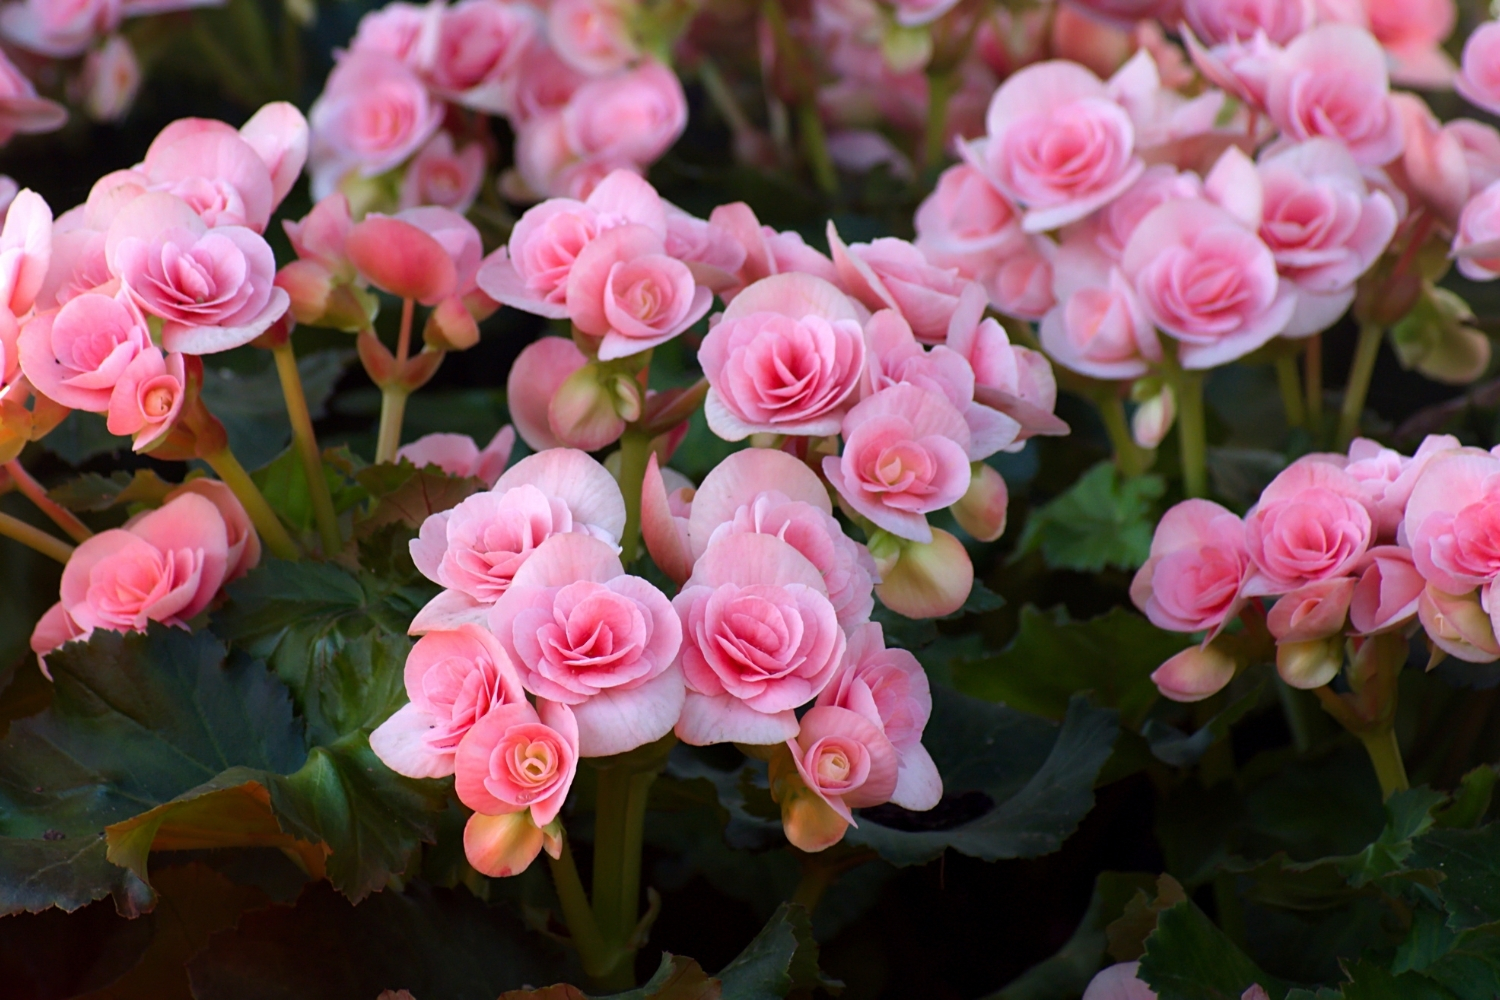 How to grow and care for begonias | Better Homes and Gardens